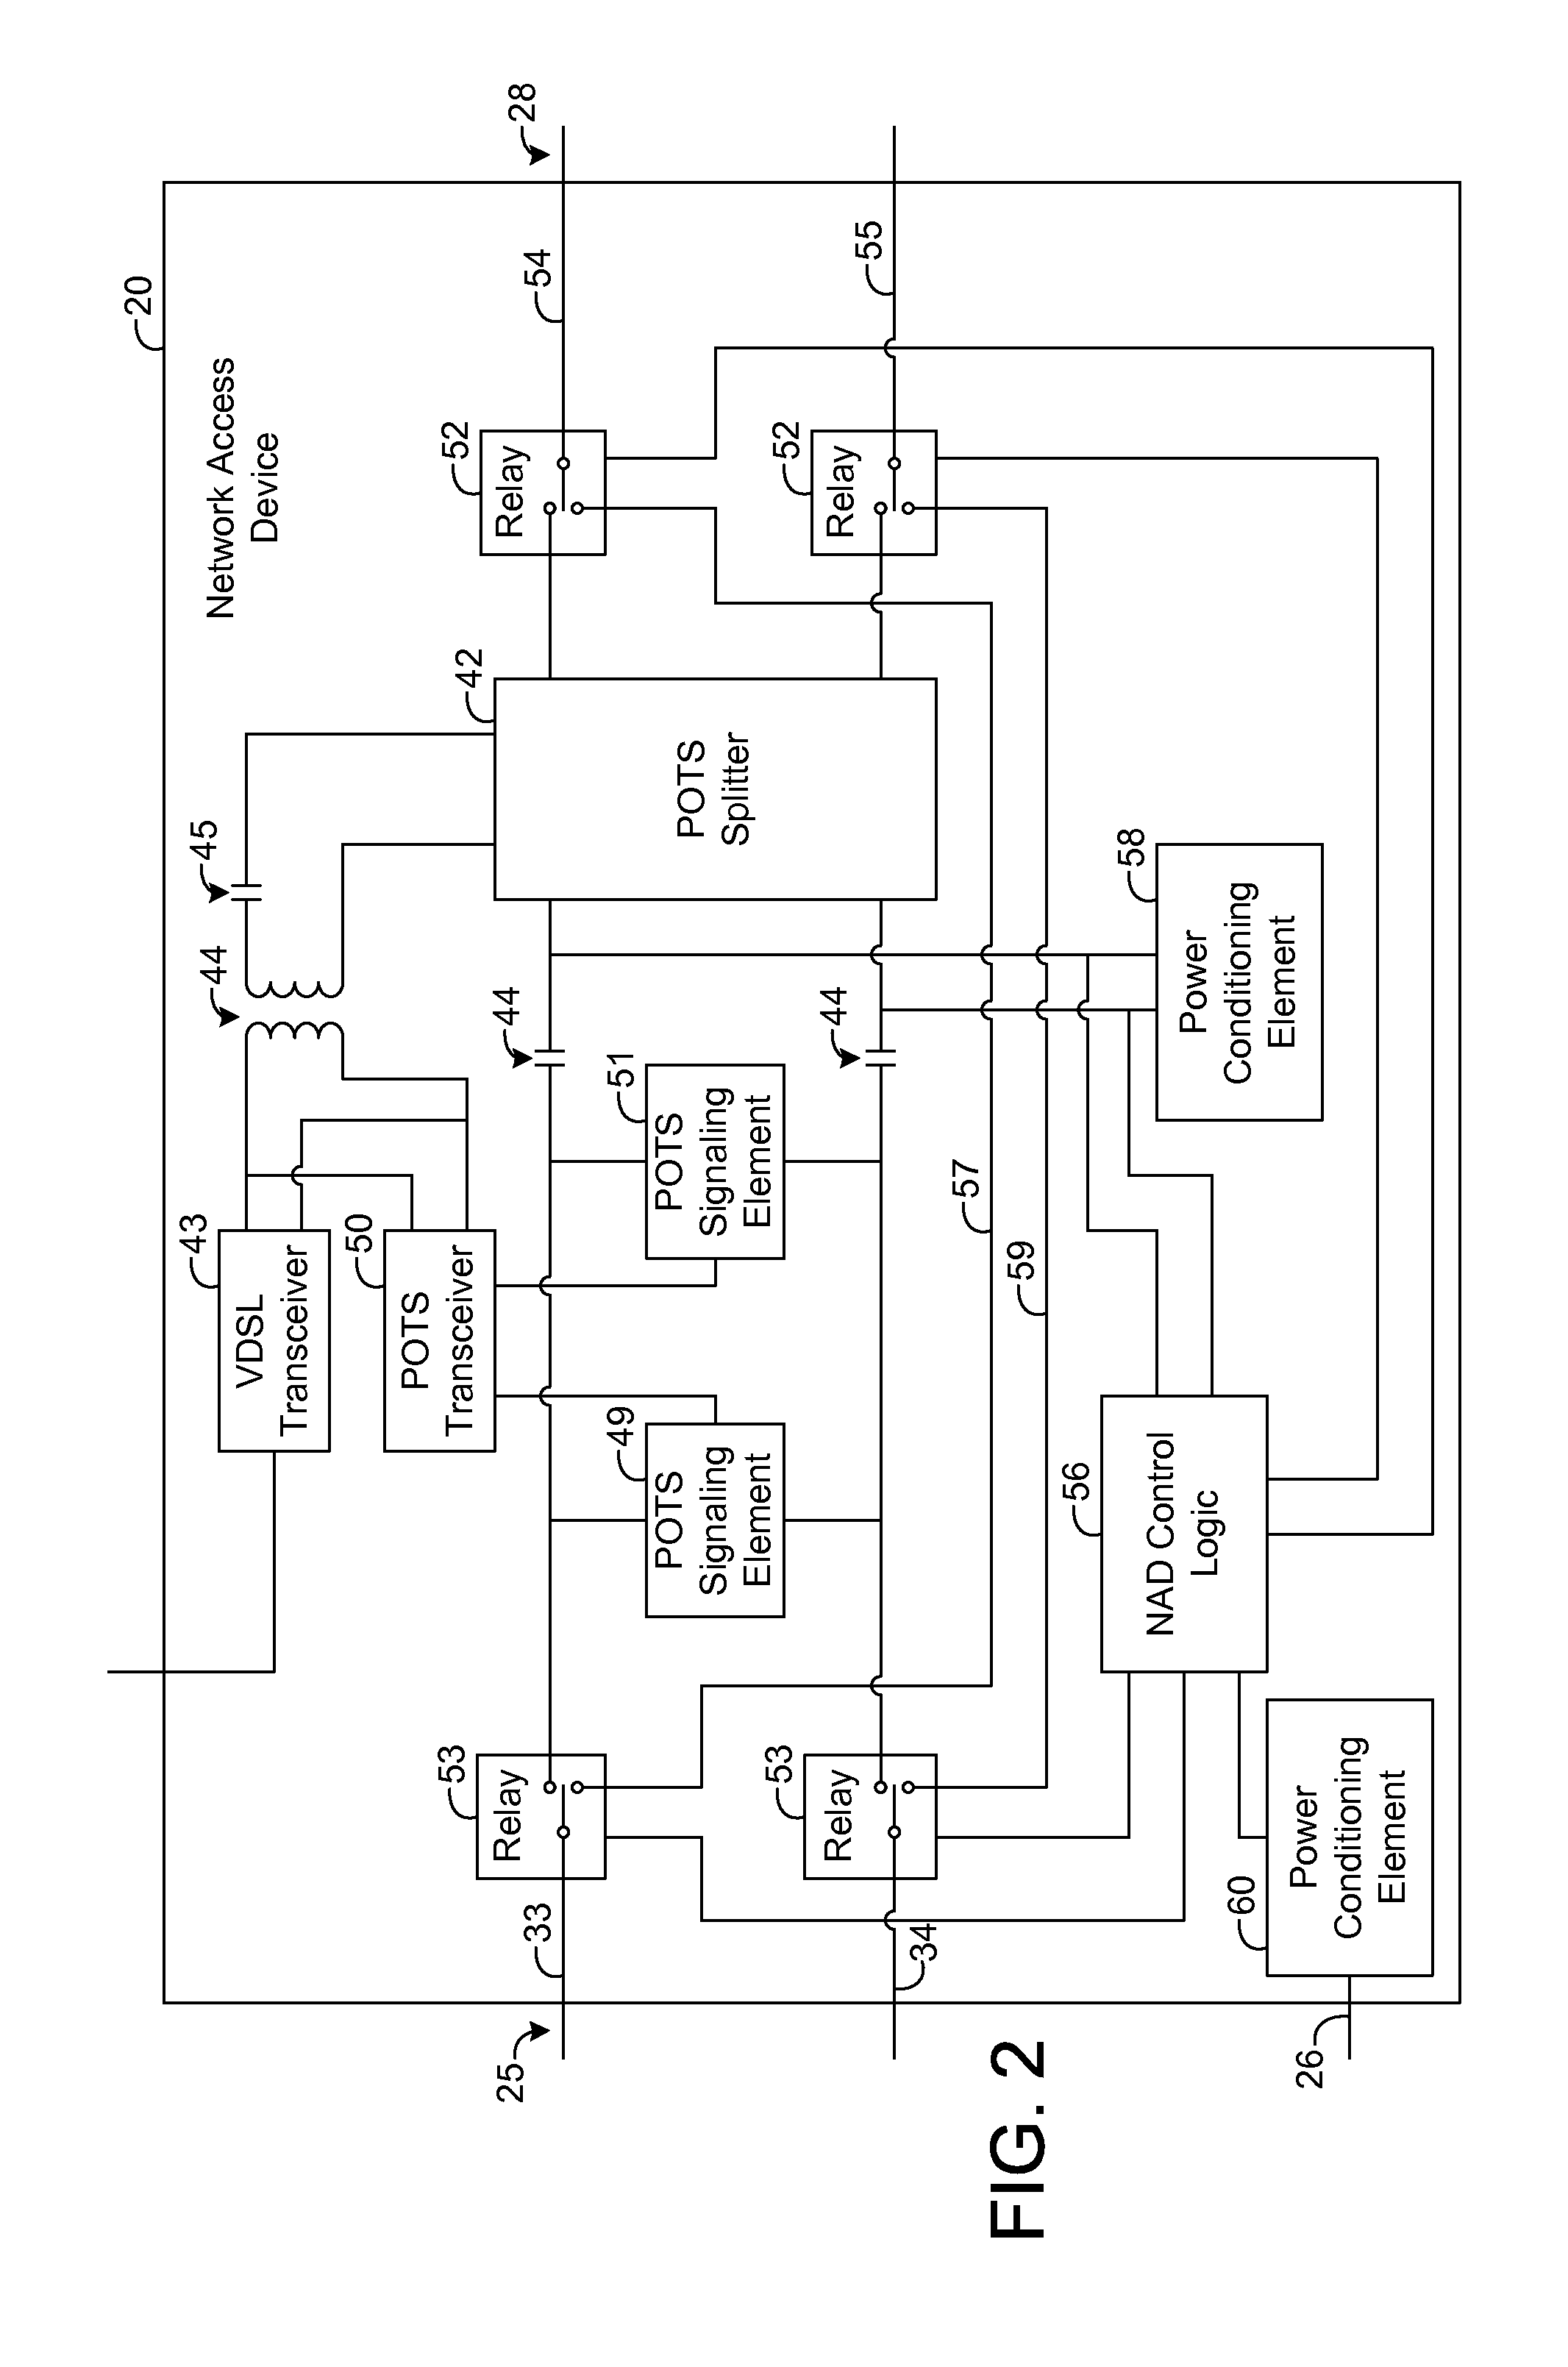 Systems and methods for powering network access devices from customer premises equipment